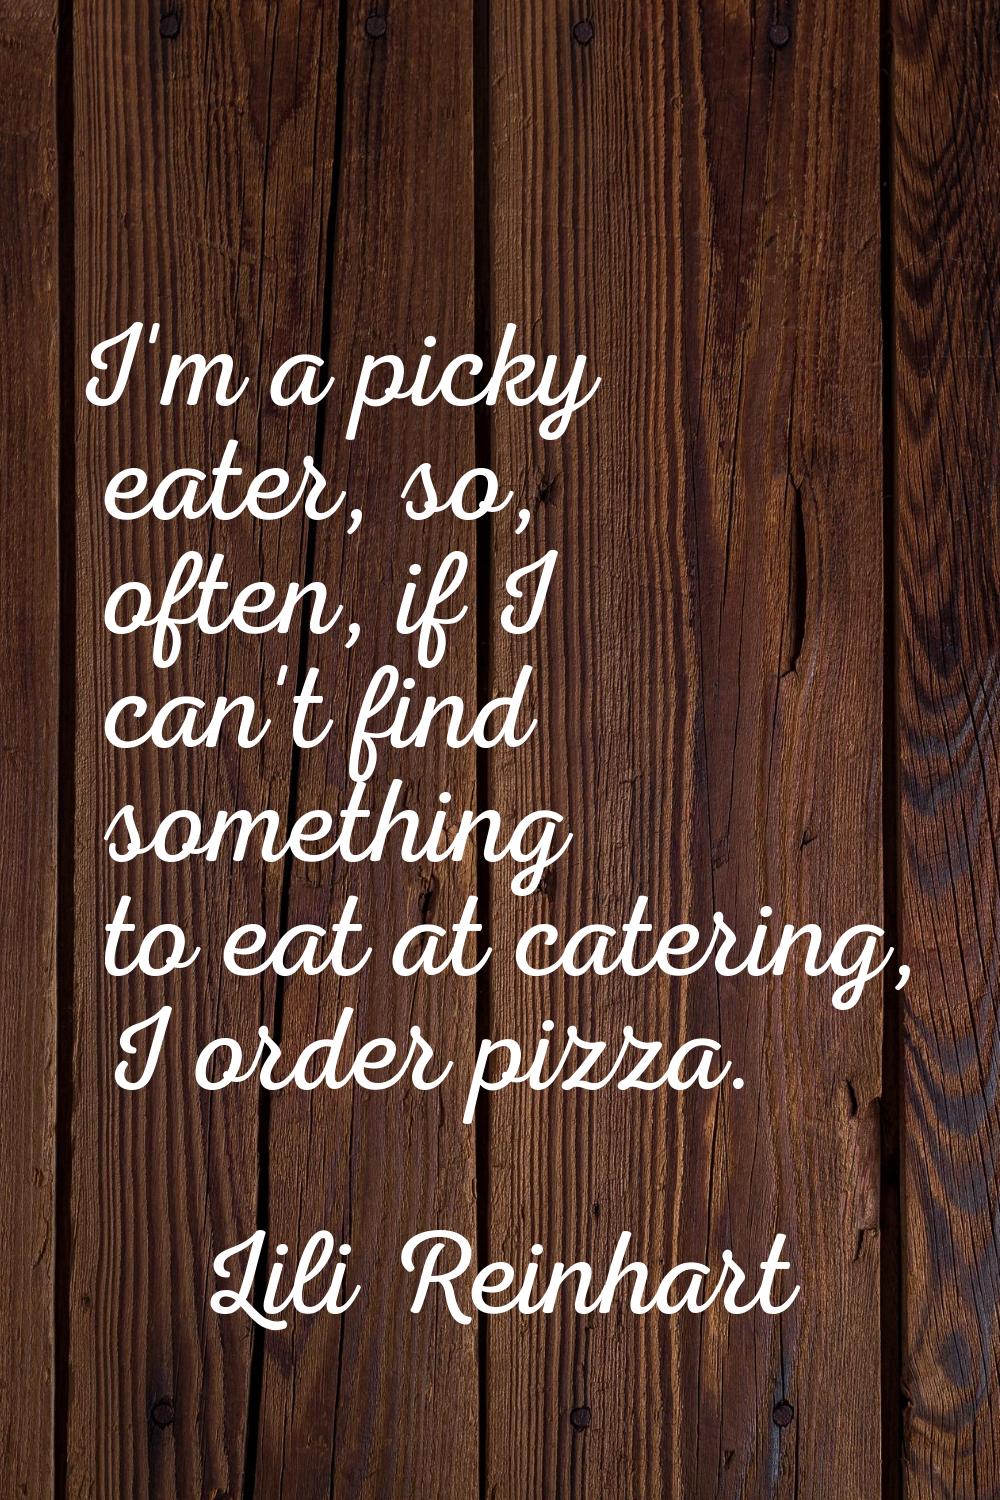 I'm a picky eater, so, often, if I can't find something to eat at catering, I order pizza.